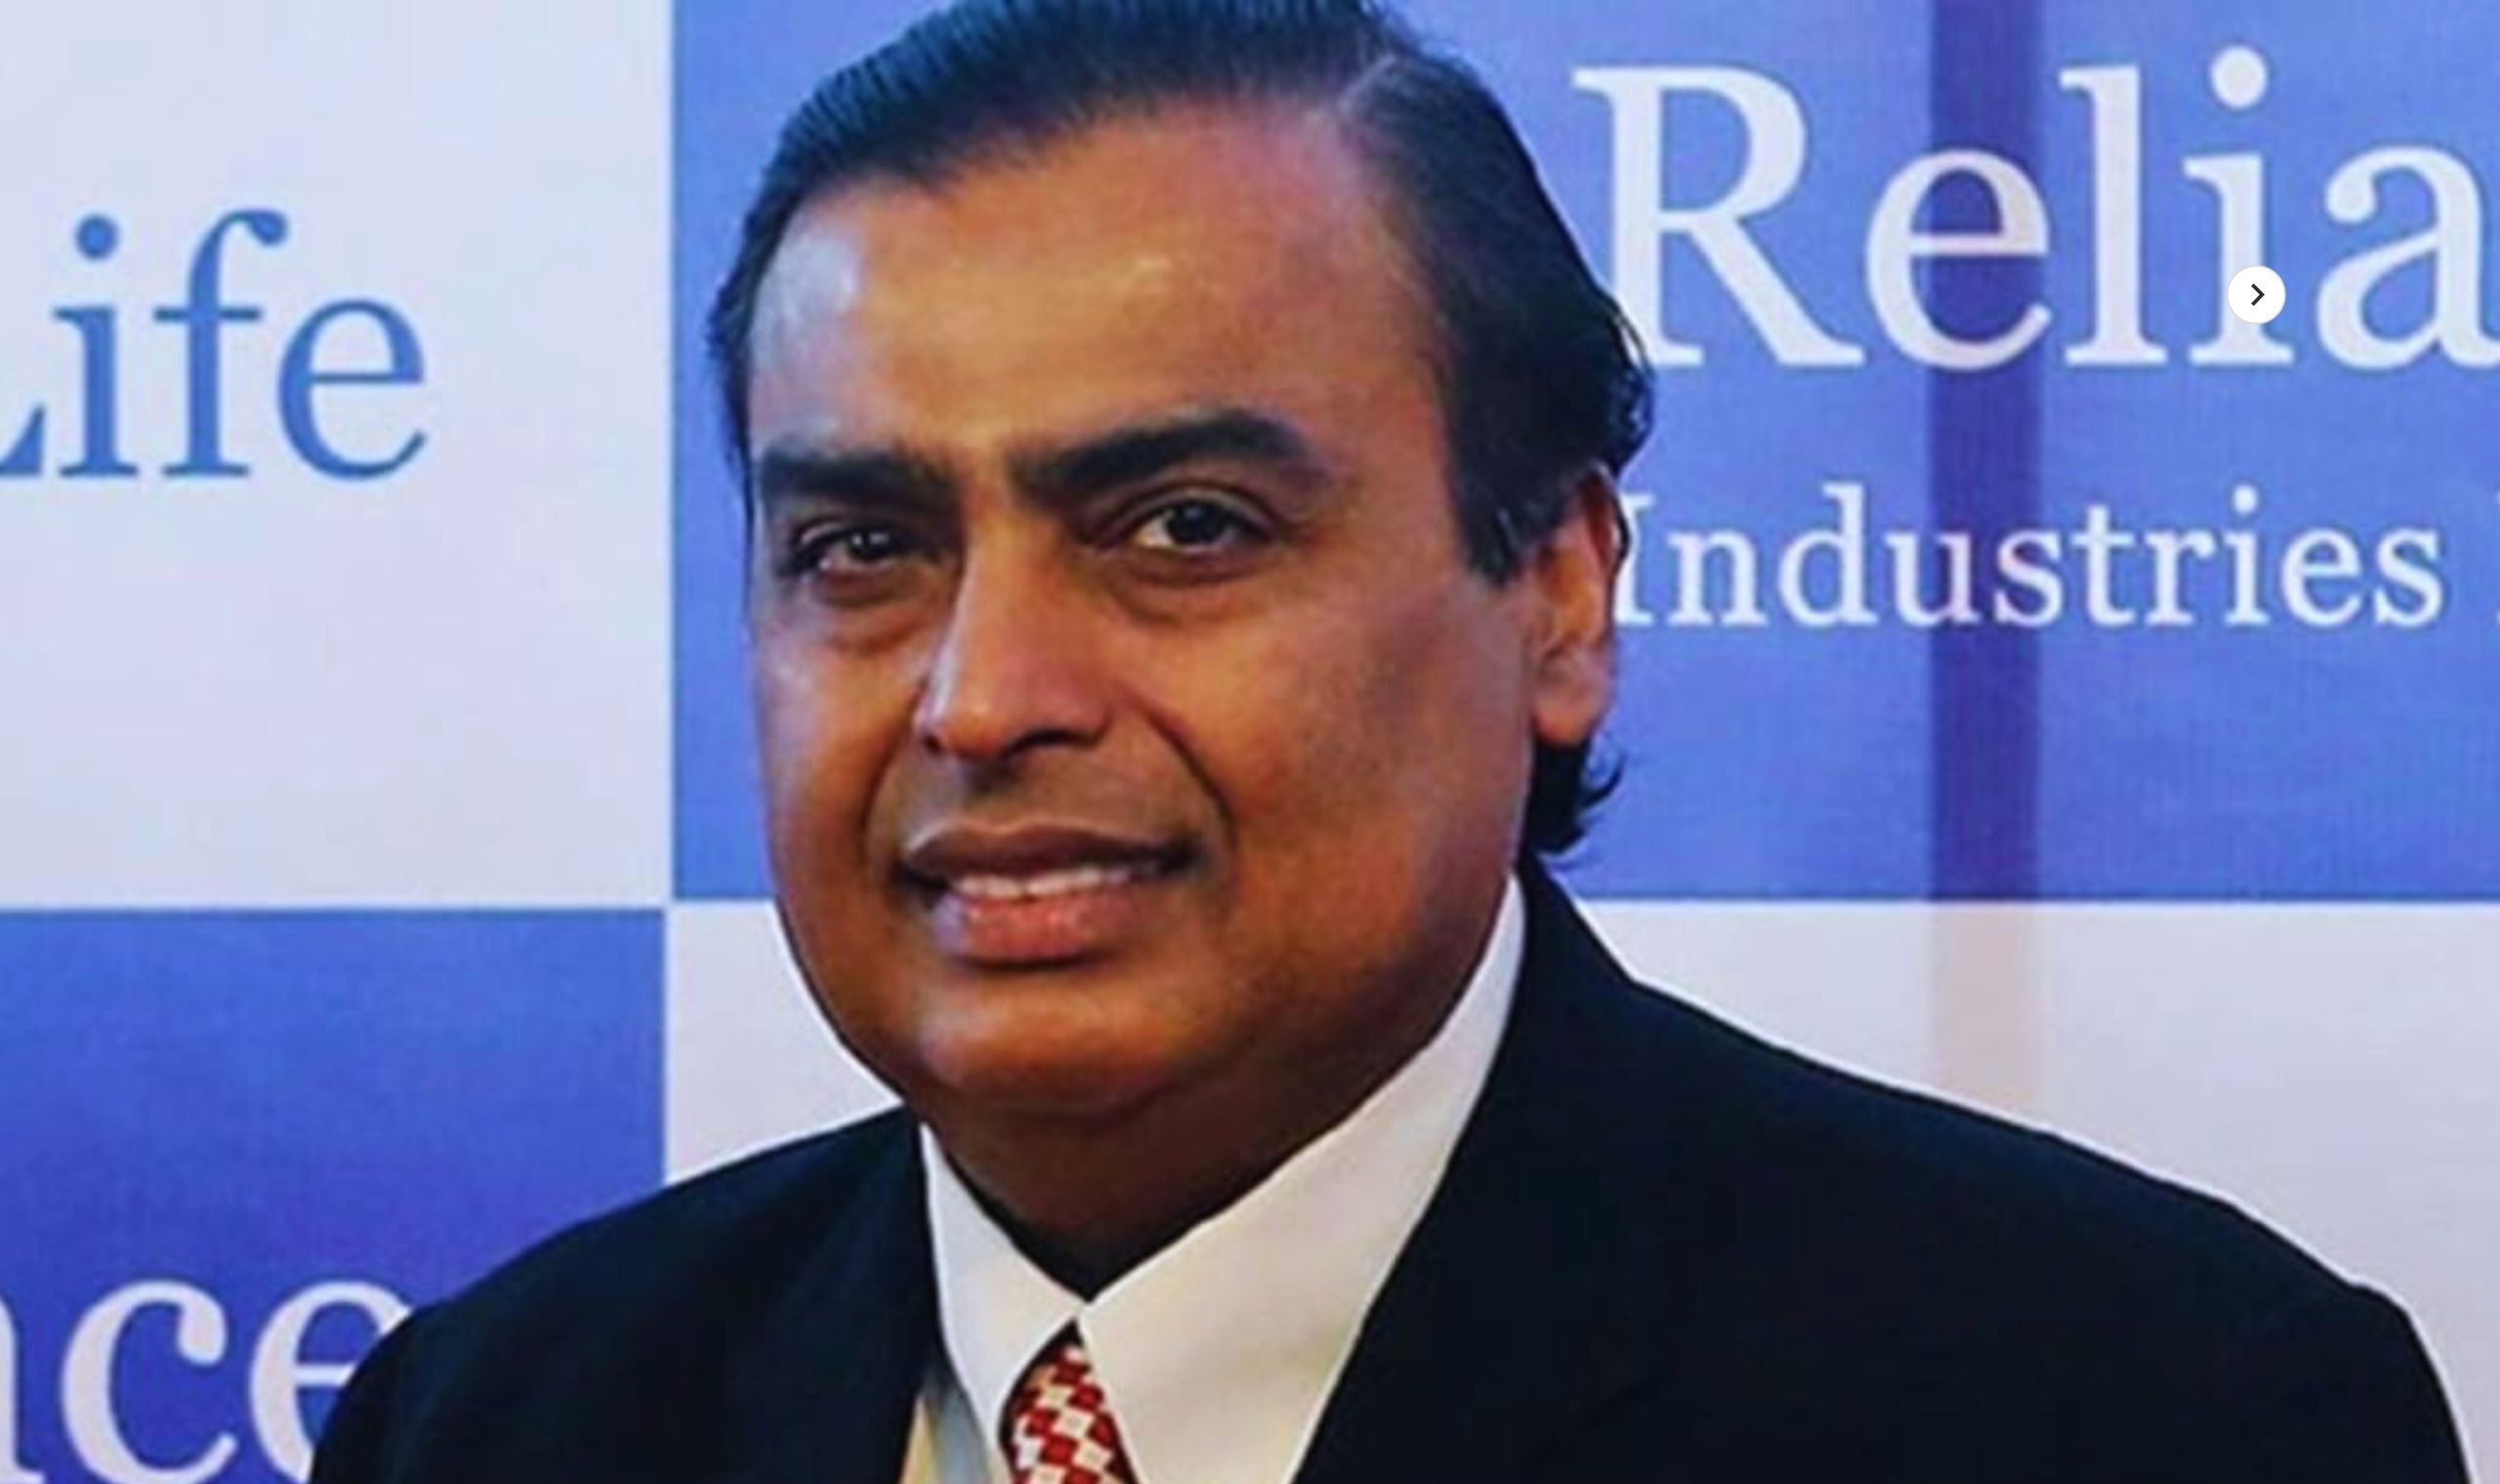 Reliance-Industries-Ltd-Hits-Record-High-Cap-Soars-to-Rs-19.2-Lakh-Crore-Stock-Markets